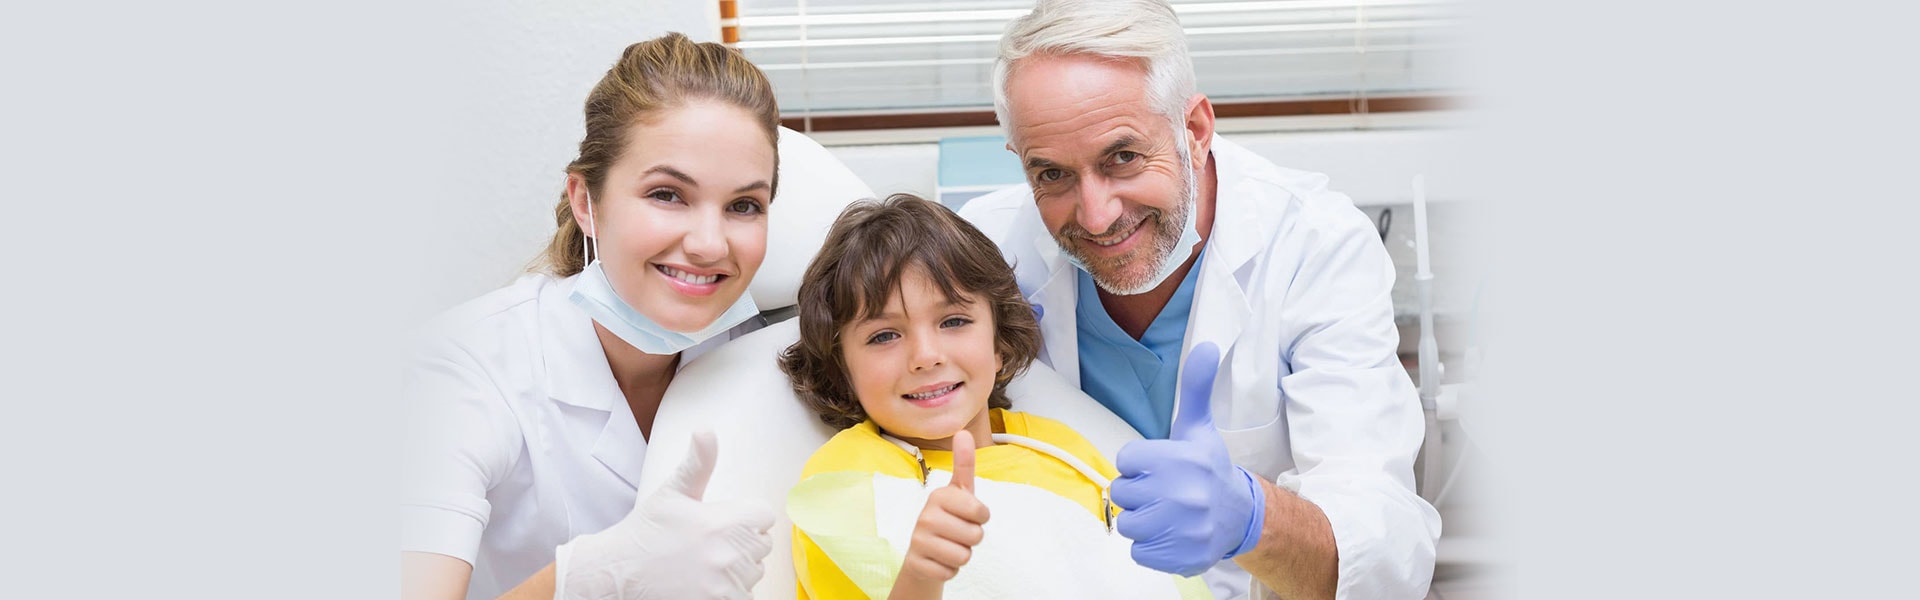 Radford Dental Wellness for Young People, Pediatric Dentist in Pearland, US, tooth